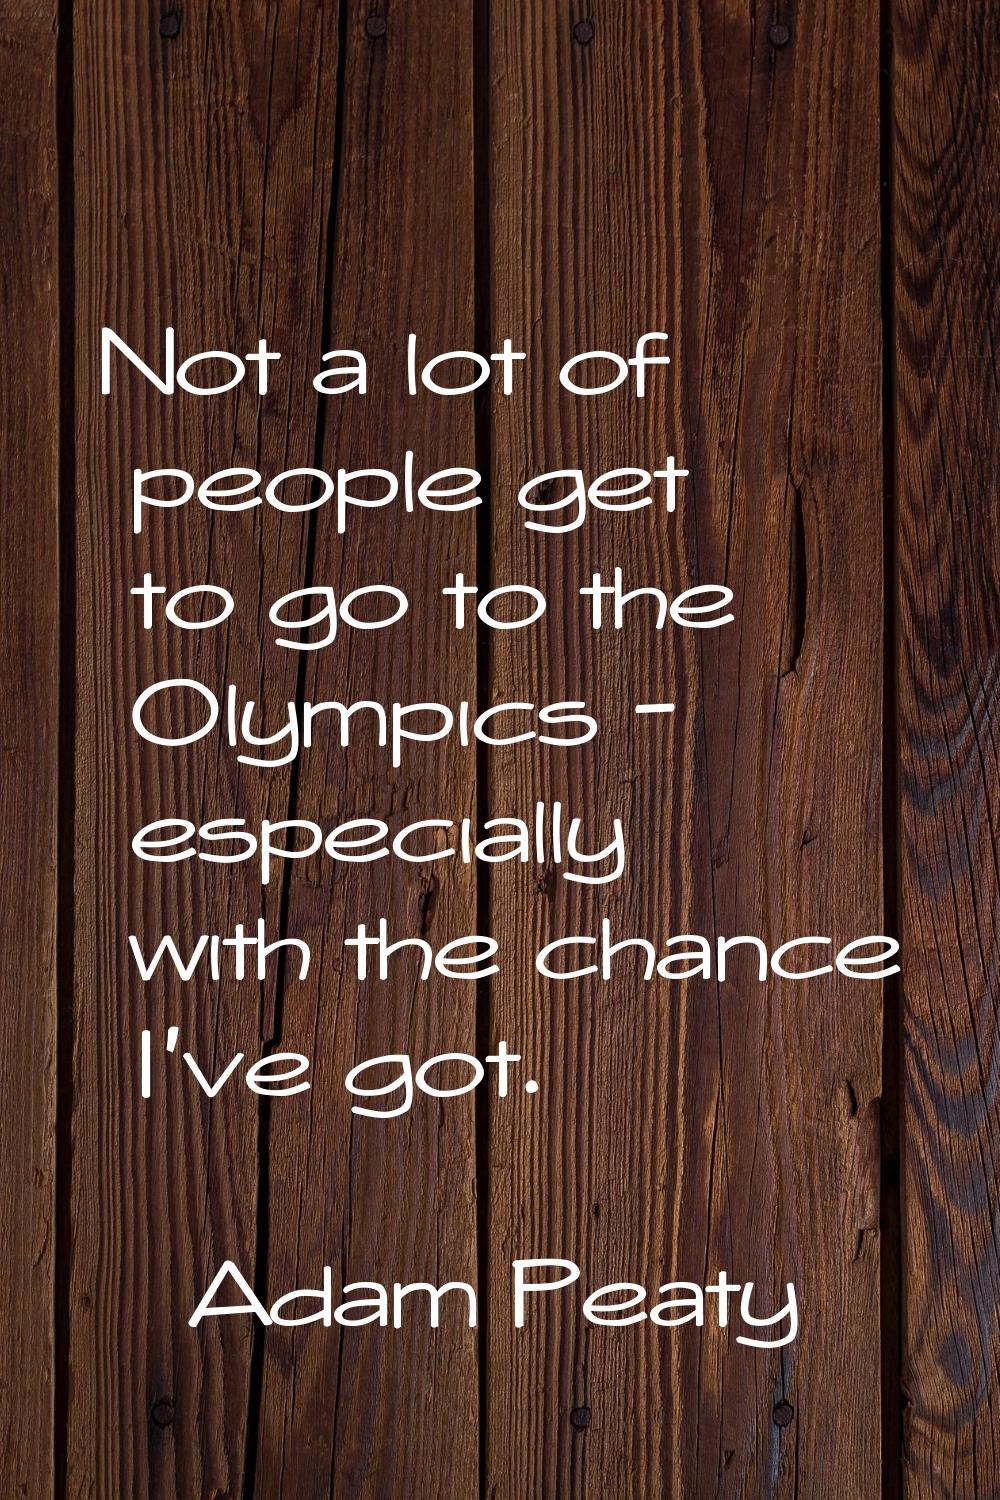 Not a lot of people get to go to the Olympics - especially with the chance I've got.